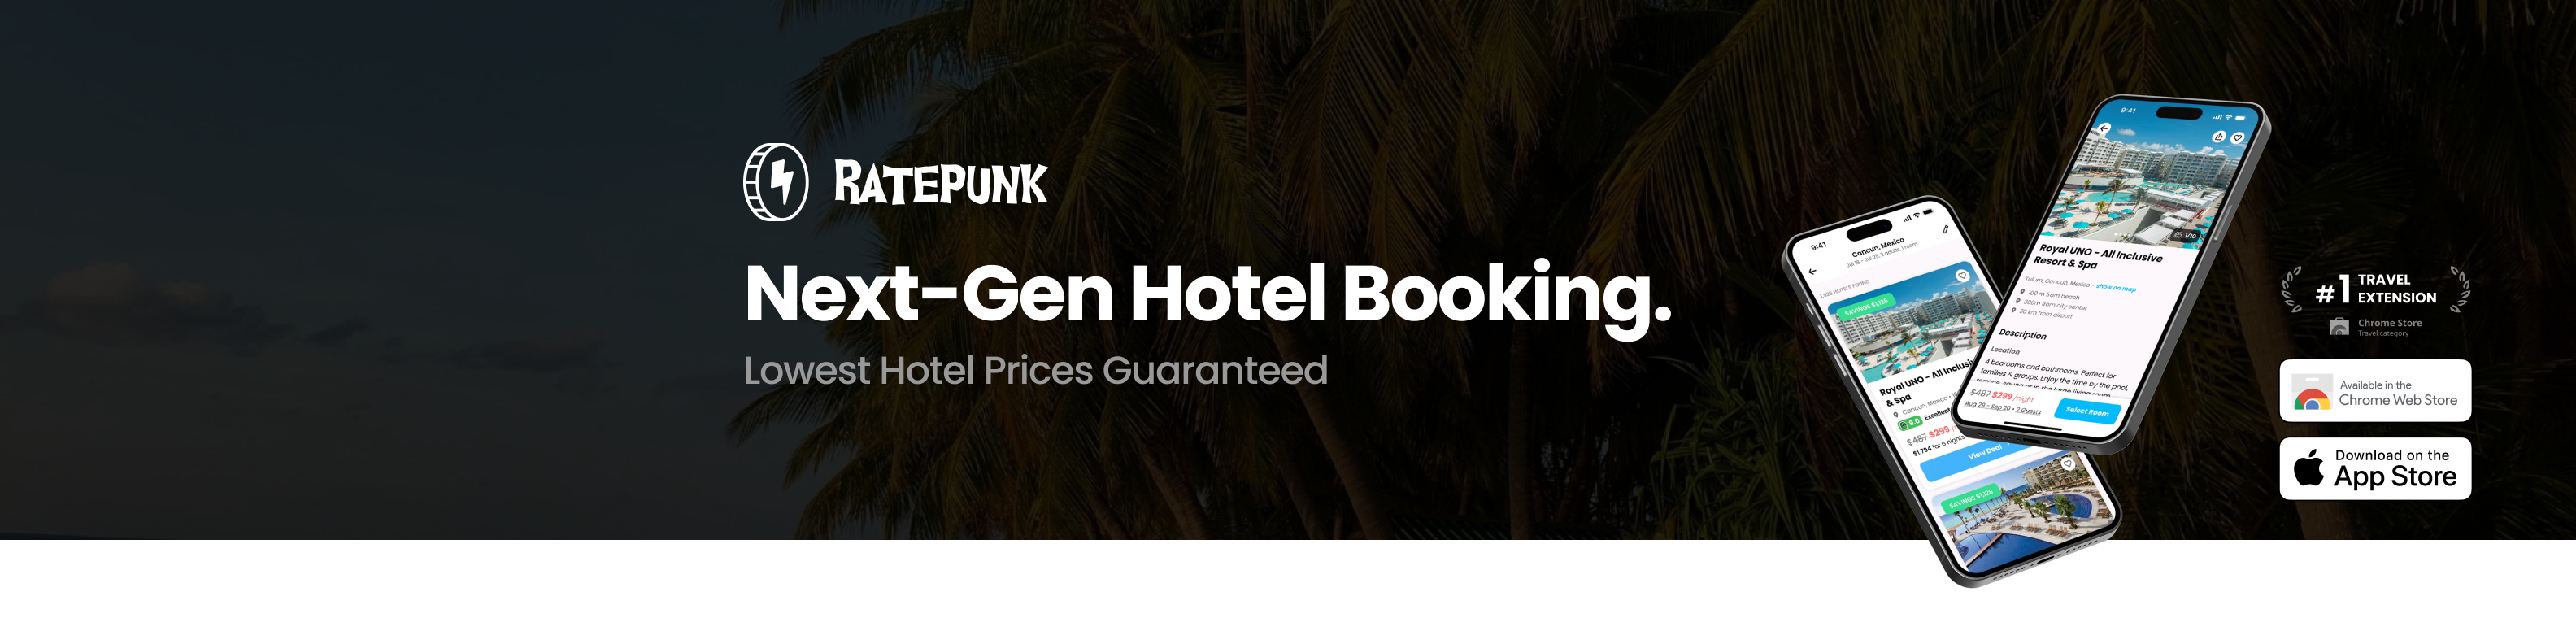 RatePunk next gen hotel booking lowest hotel prices guaranteed - cheap travel